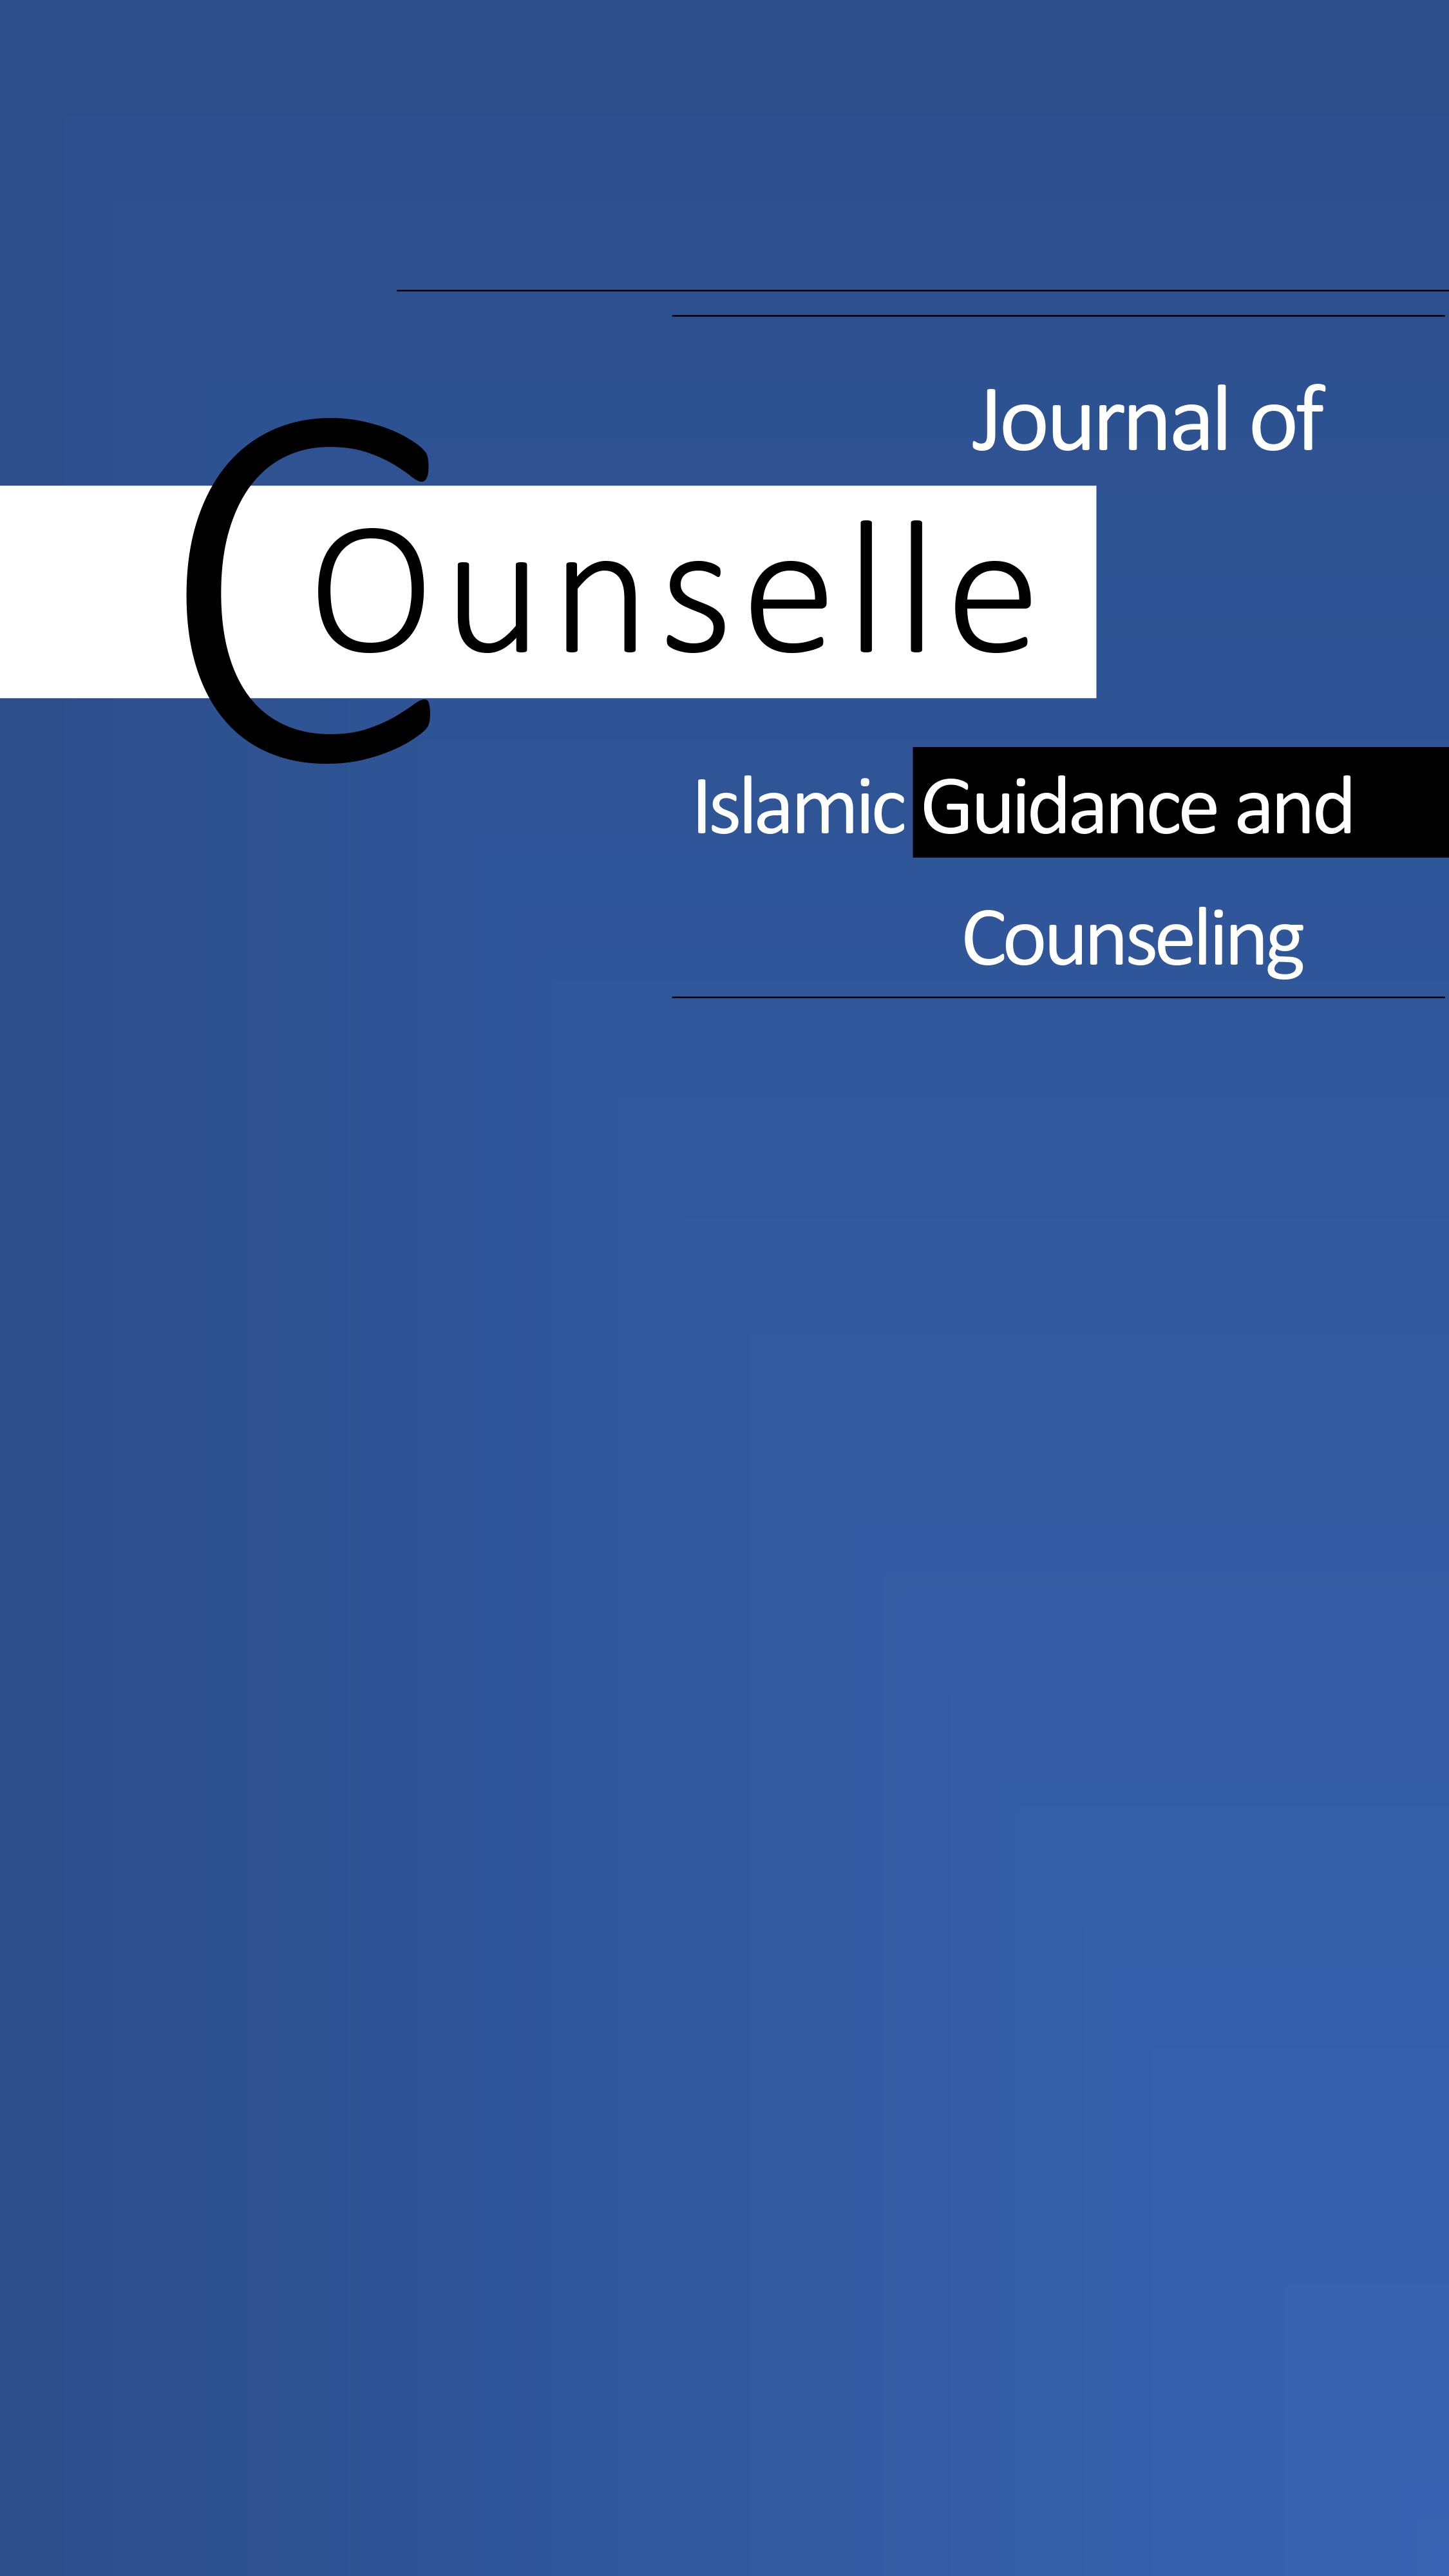 About the Journal | Counselle| Journal of Islamic Guidance and Counseling